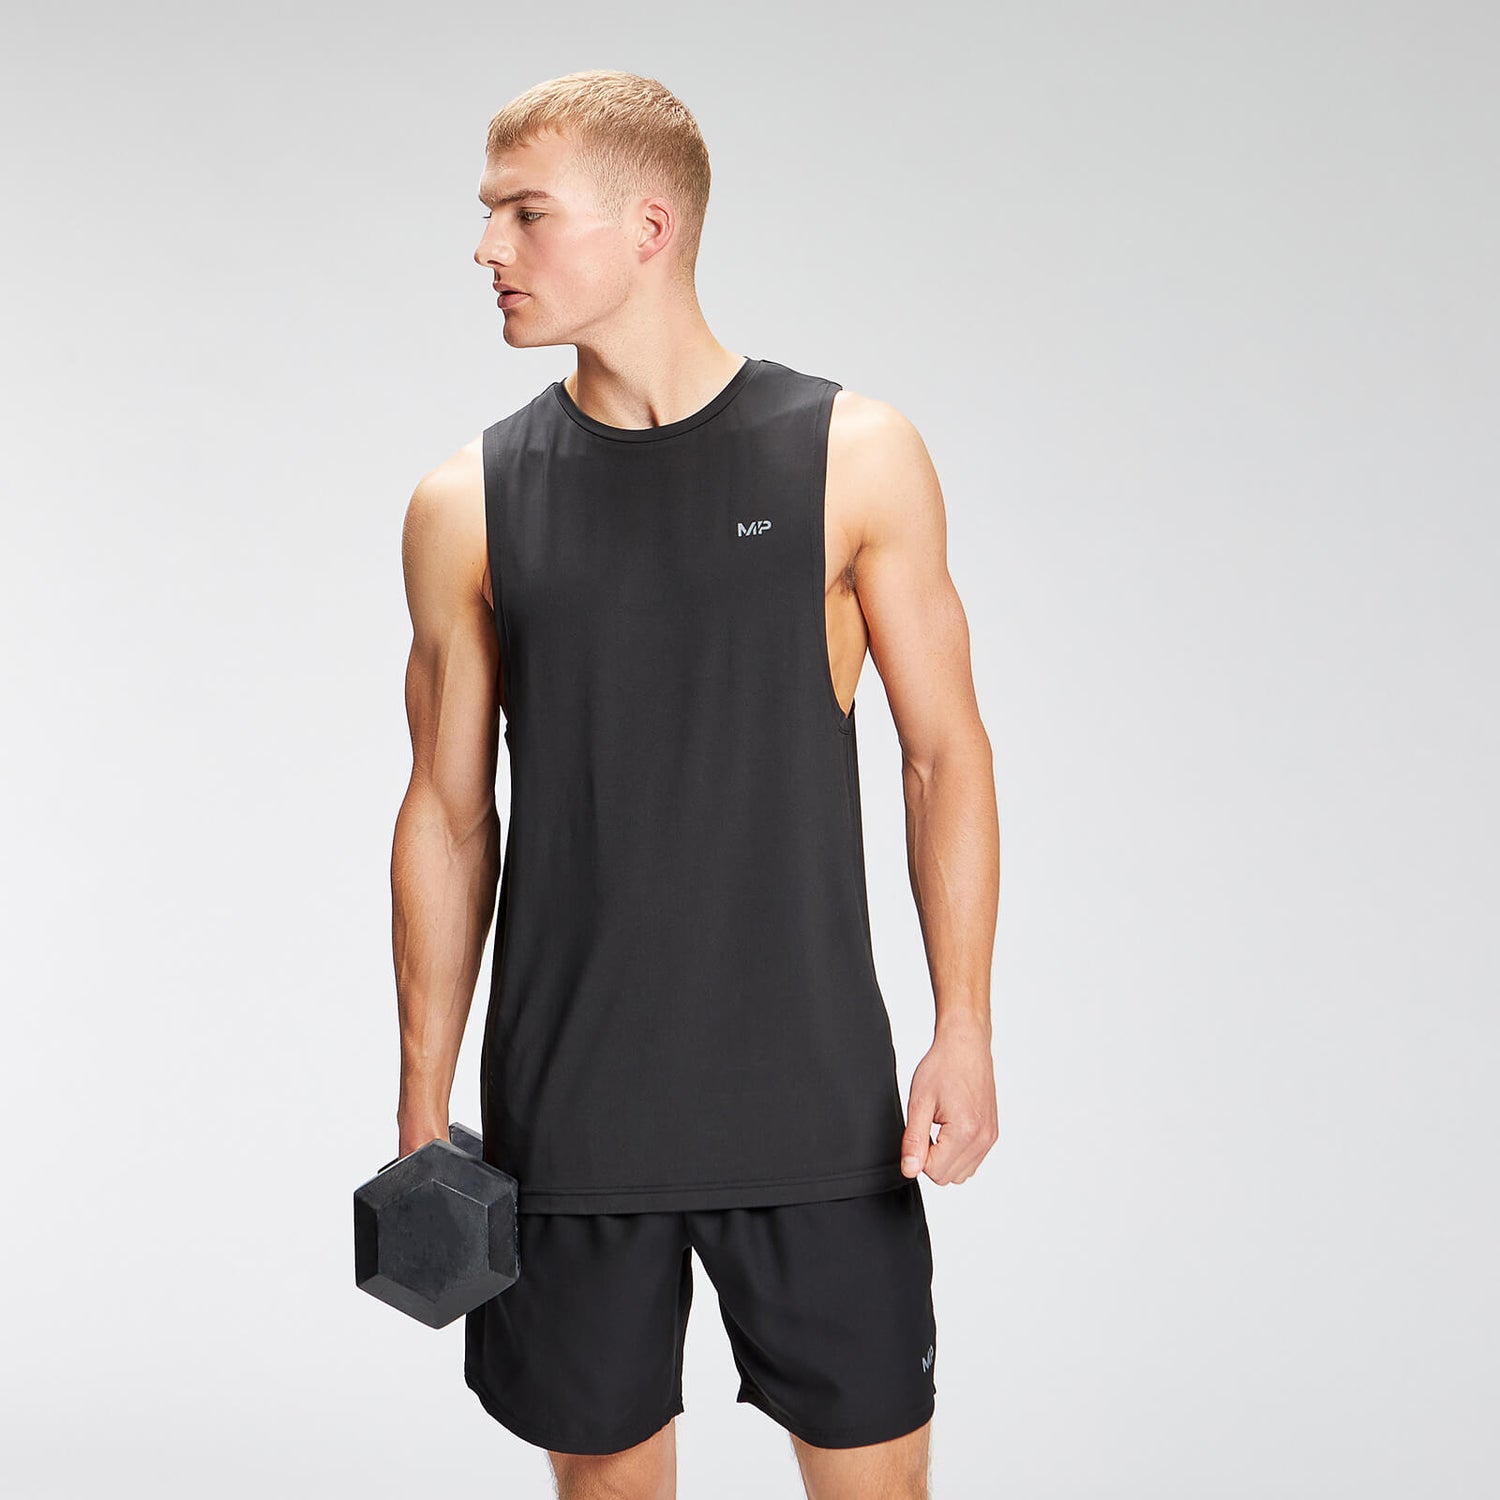 MP Férfi Repeat Graphic Training Tank Top - Fekete